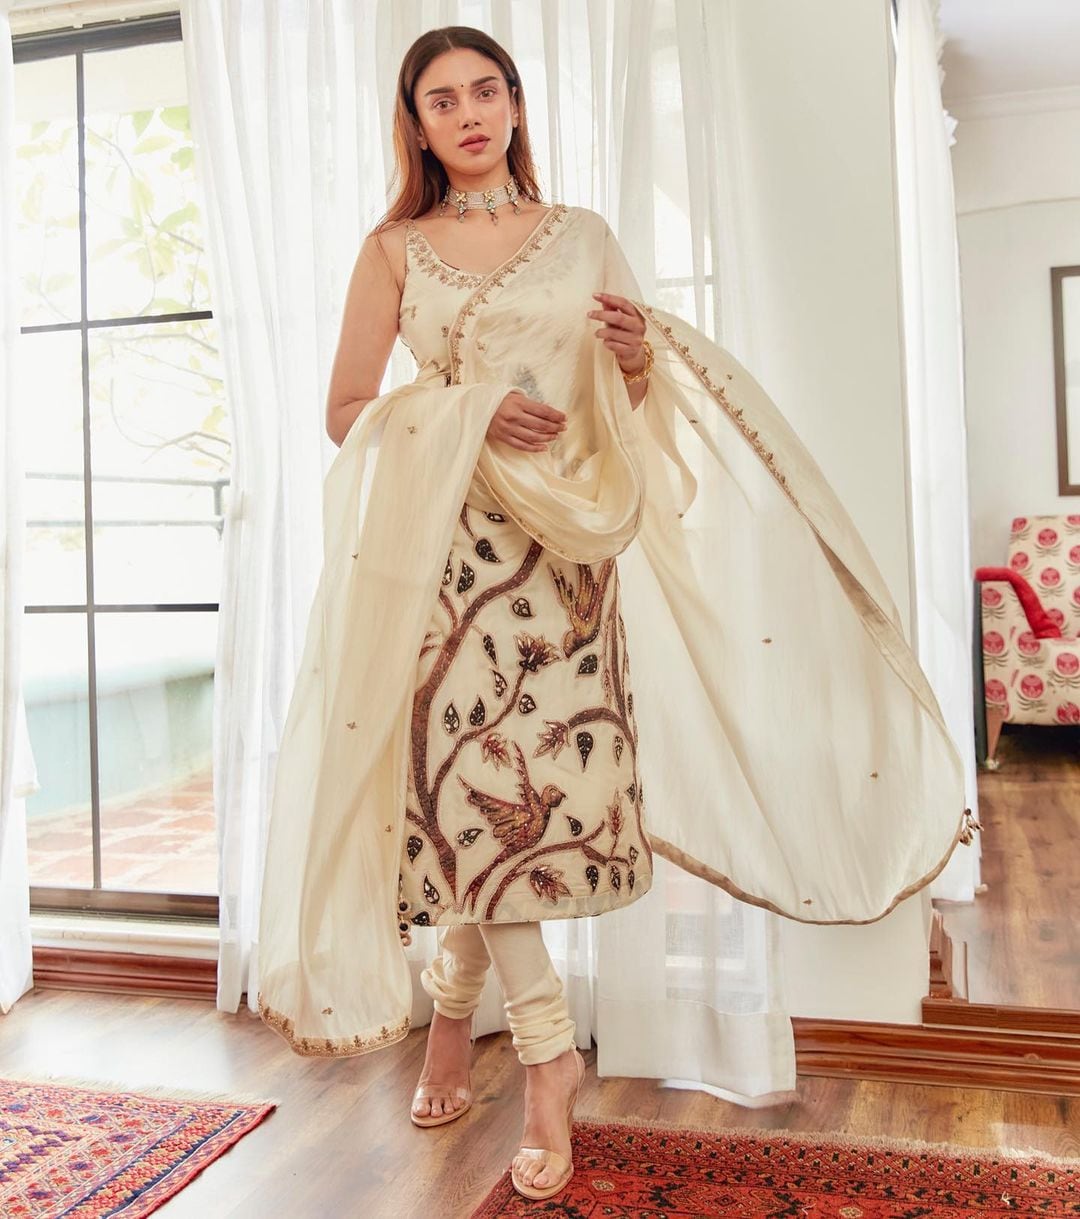 Aditi Rao Hydari in the ivory suit with the floral embellishment is grace personified